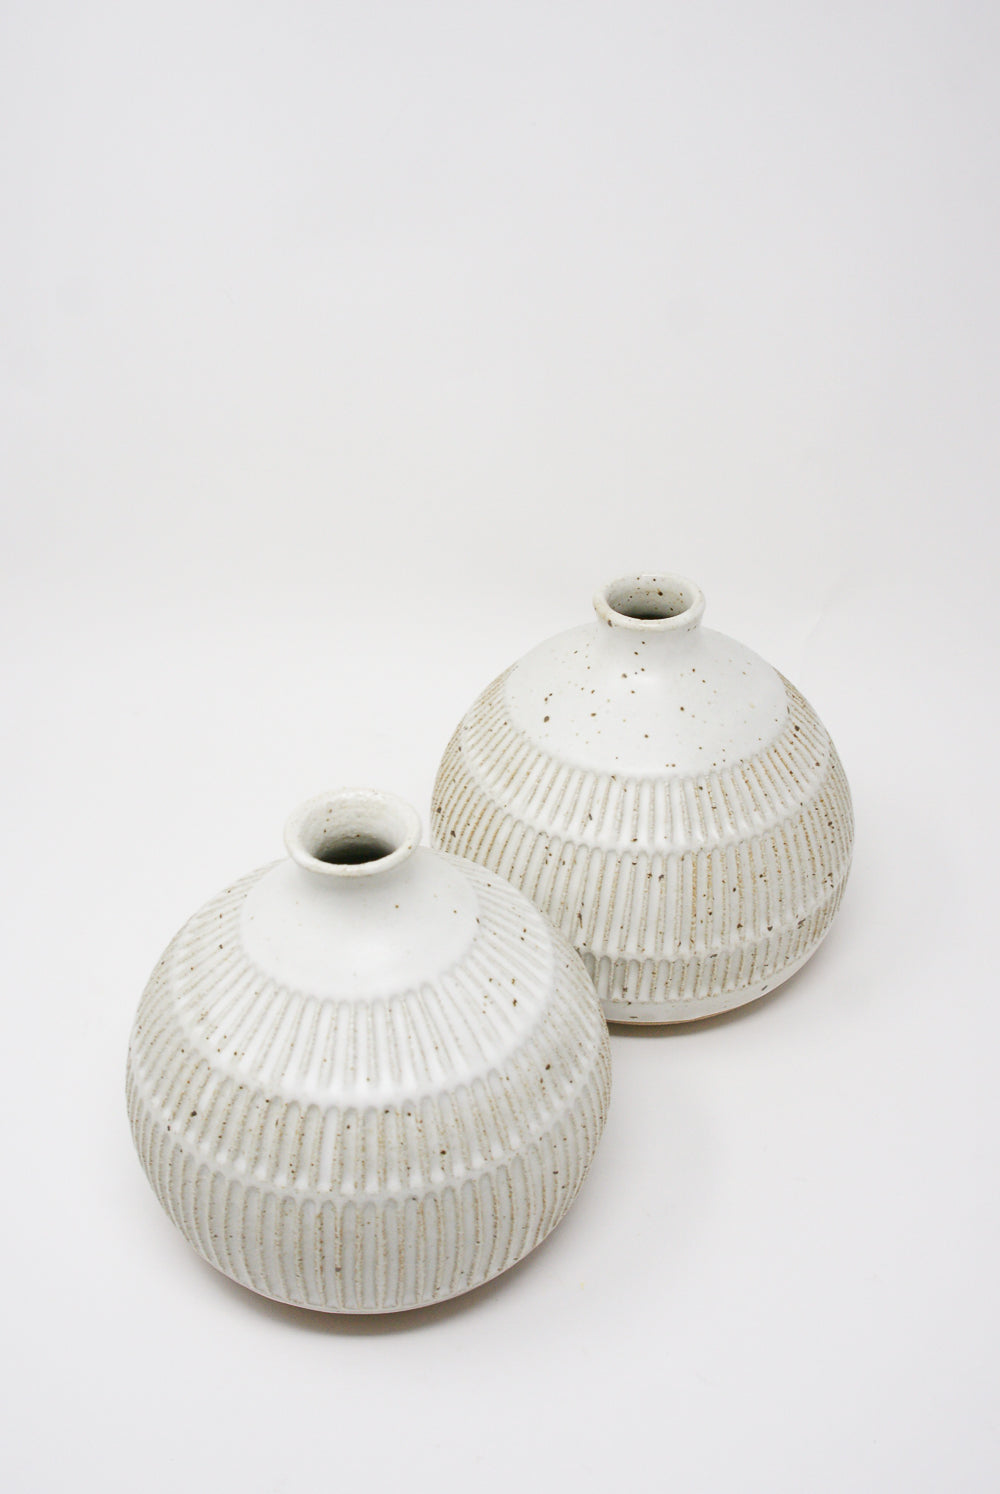 Two white ceramic vases with textured patterns on a plain background, including one Mt. Washington 6" Tulip Vase in White.